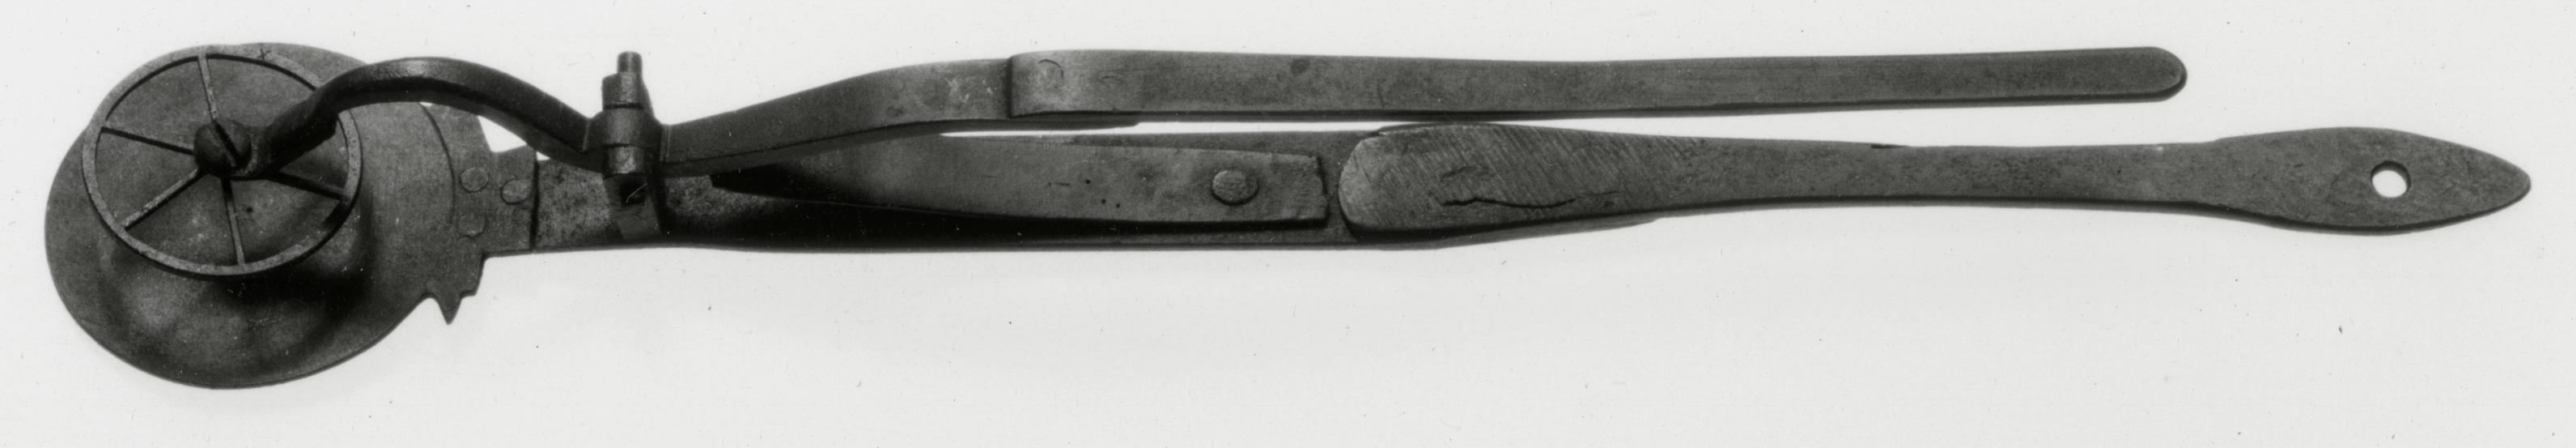 Black and white photograph of a pendulum spring blueing tool.